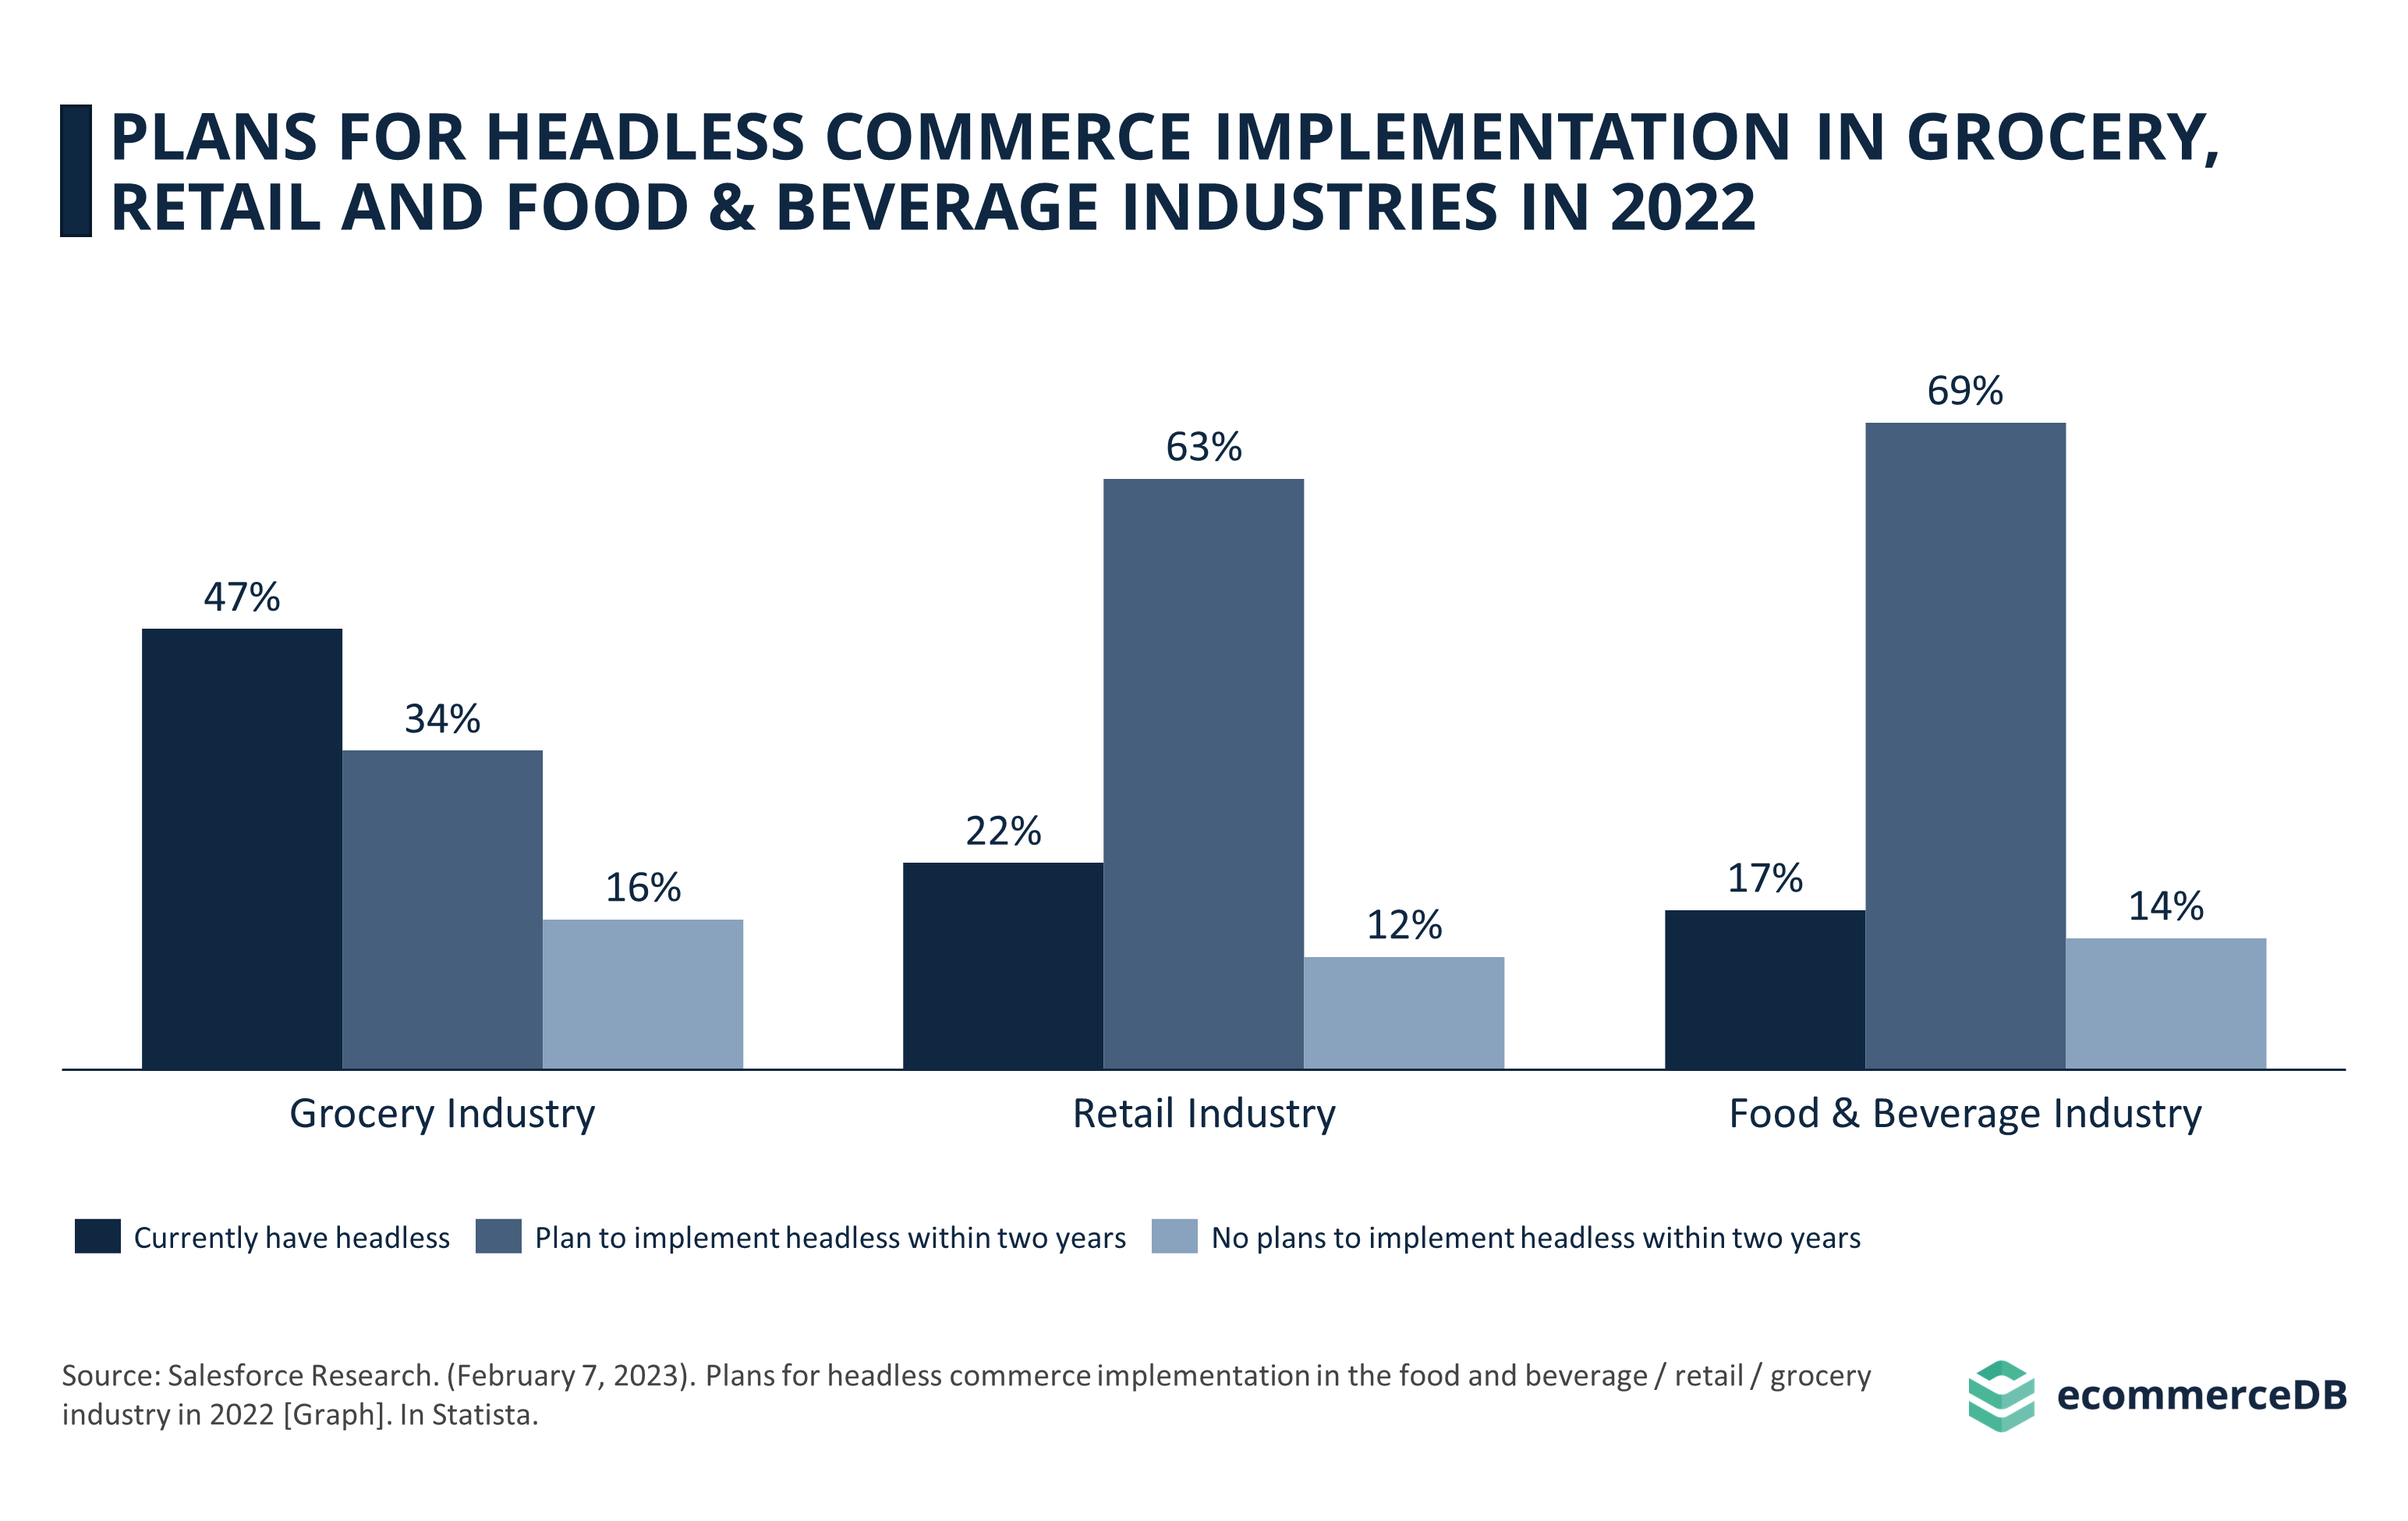 Plans for Headless Commerce Implementation in Grocery, Retail and Food & Beverage Industries in 2022